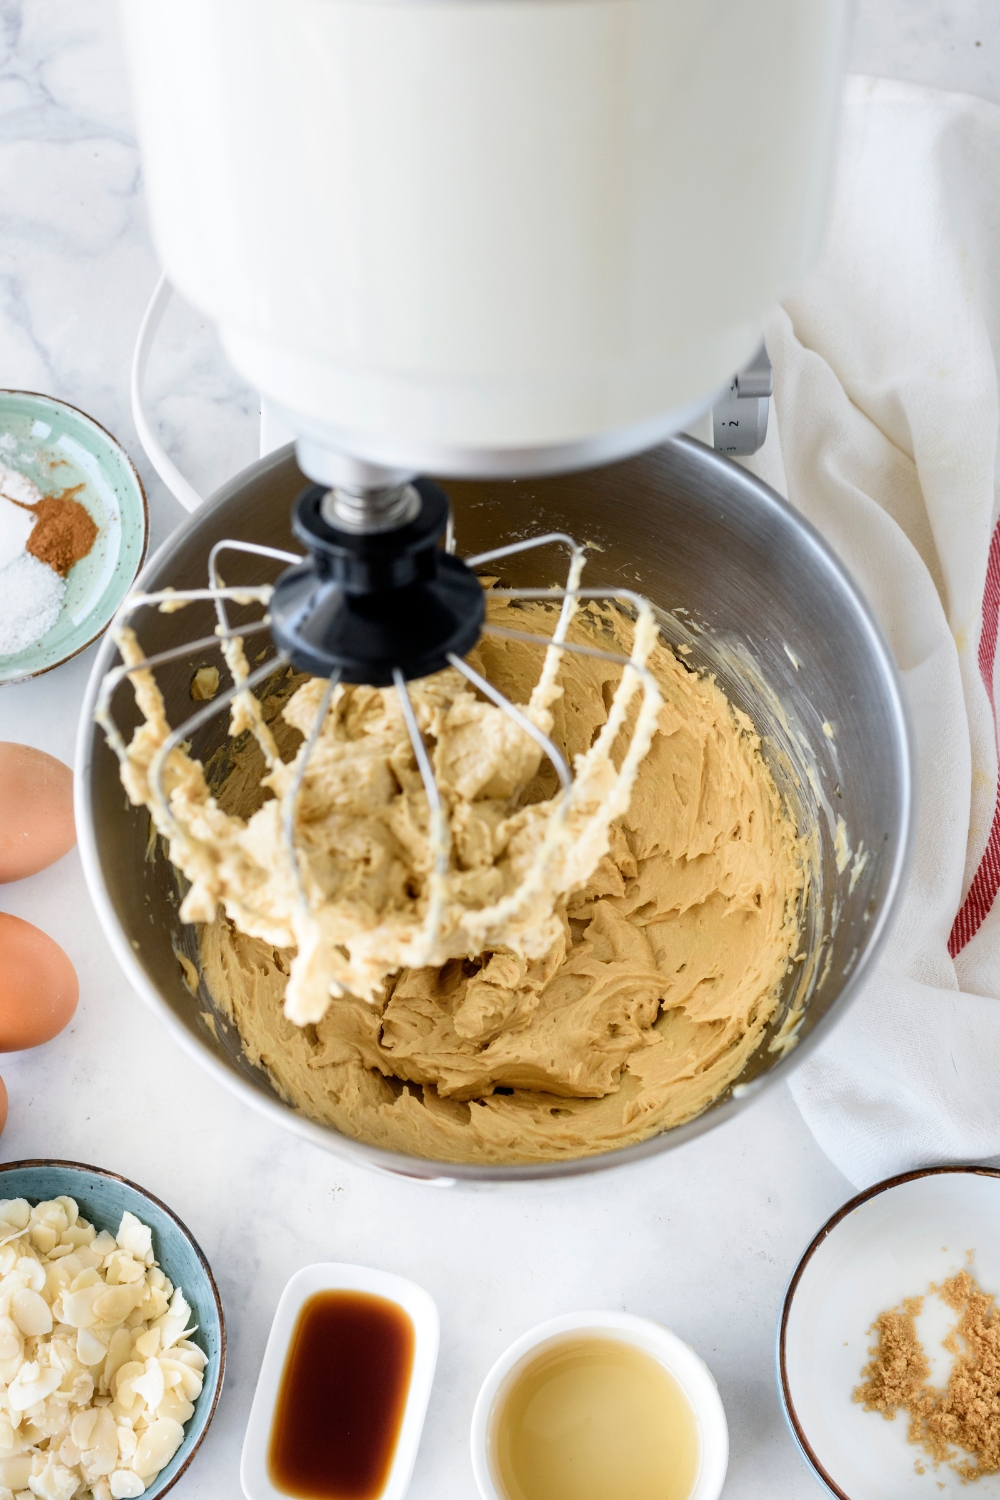 Honey cake batter in a stand mixer.